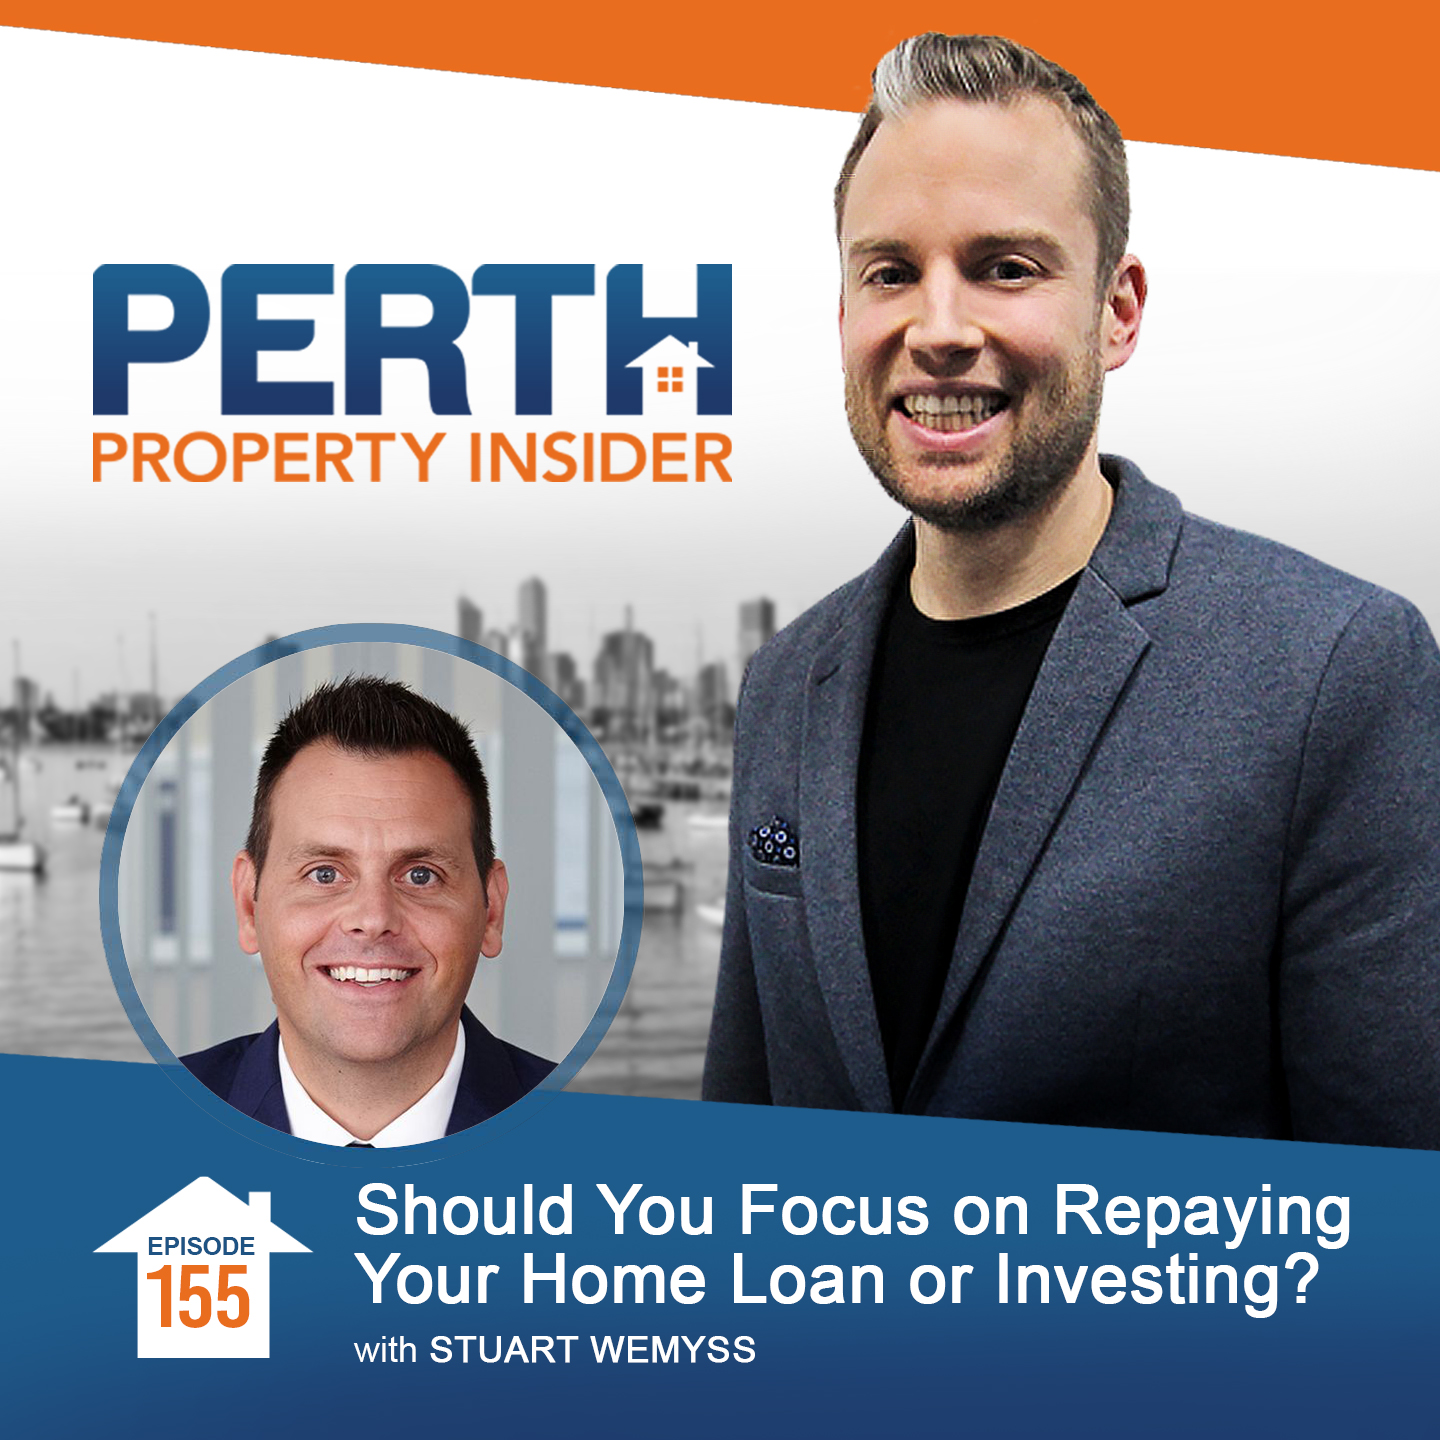 Should You Focus on Repaying Your Home Loan or Investing? - Stuart Wemyss